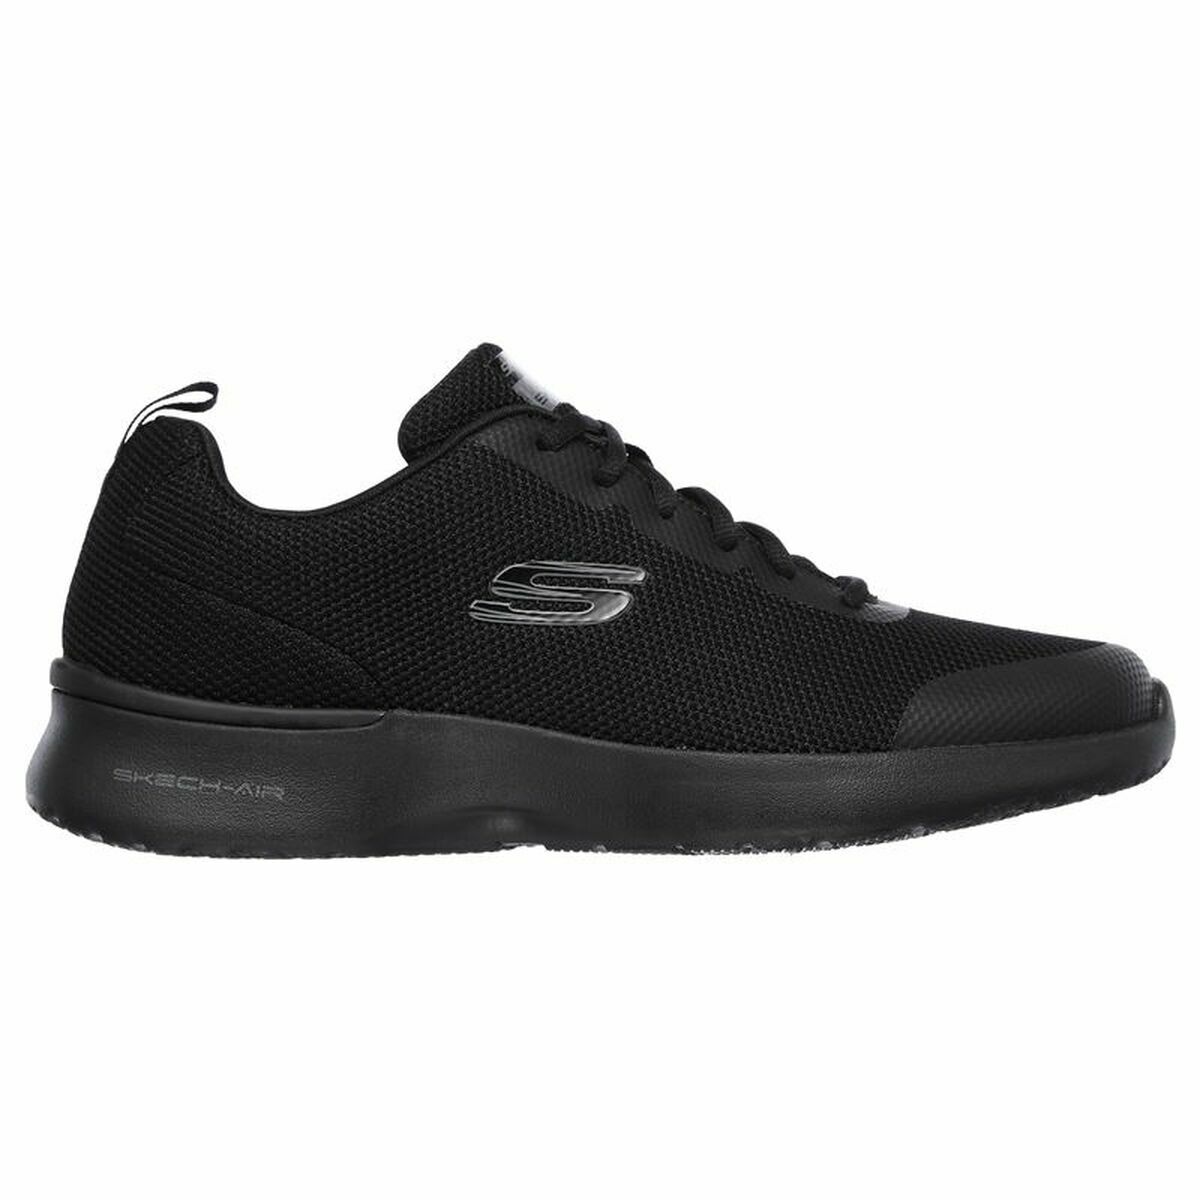 Chaussures casual homme Skechers Air Dynamight - Winly Noir